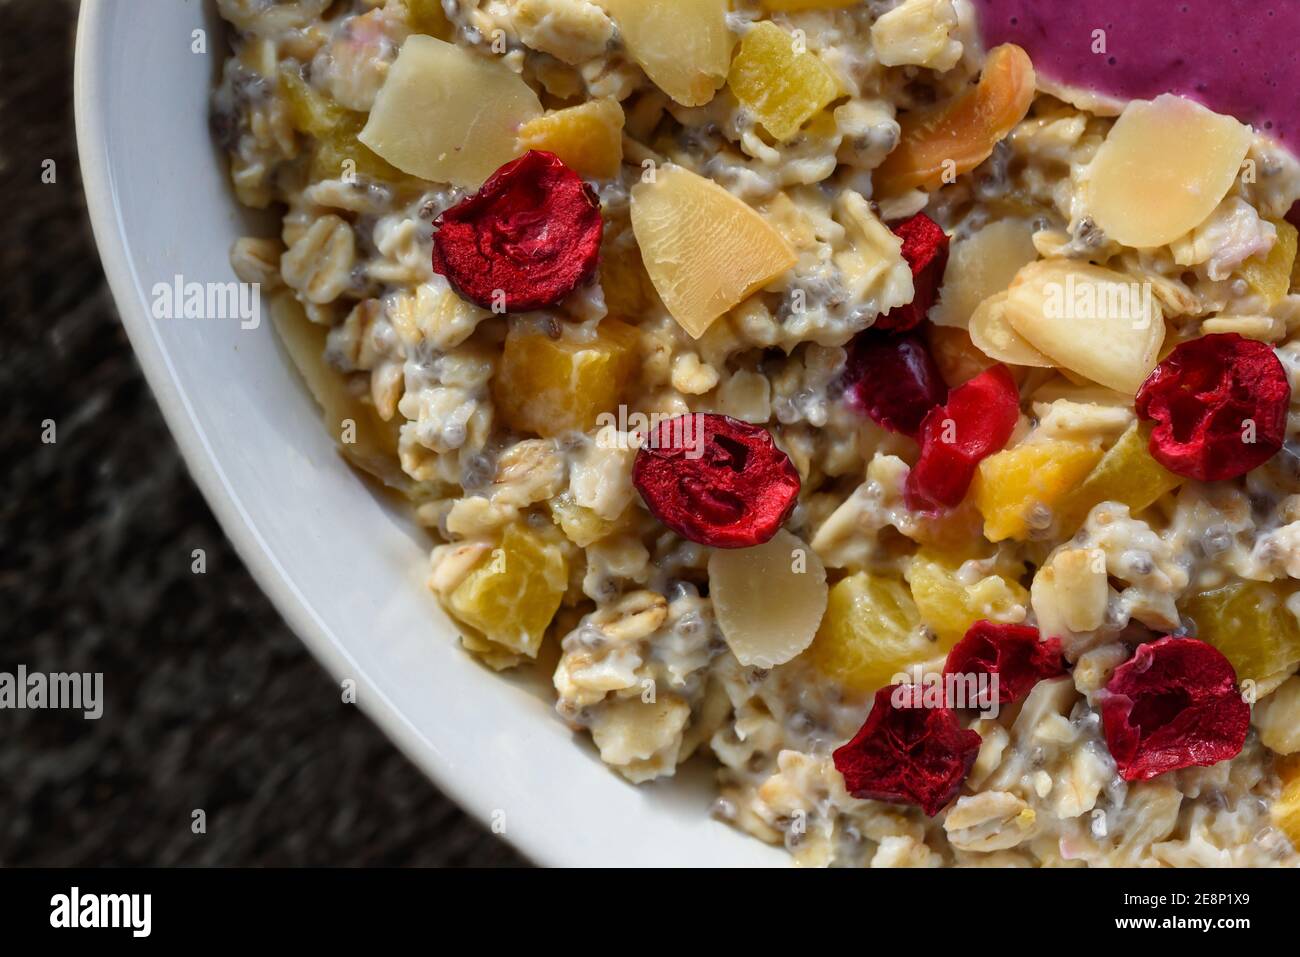 Porridge with chia seeds, almonds, orange pieces, and fruits, flat lay close-up Stock Photo